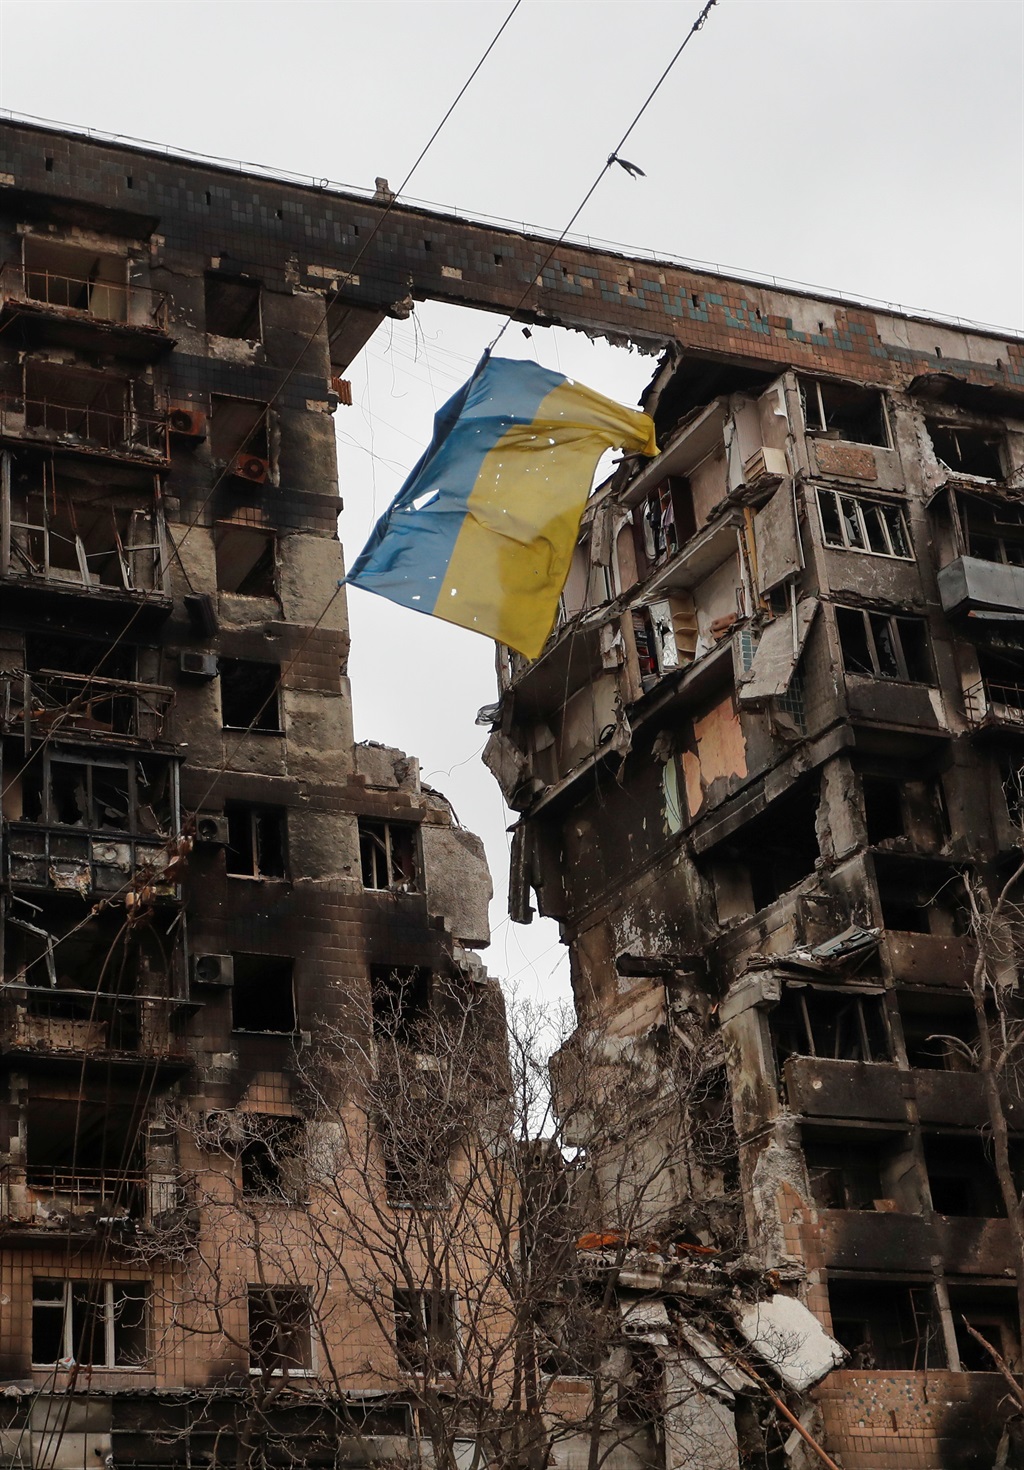 A view shows a torn flag of Ukraine hung on a wire